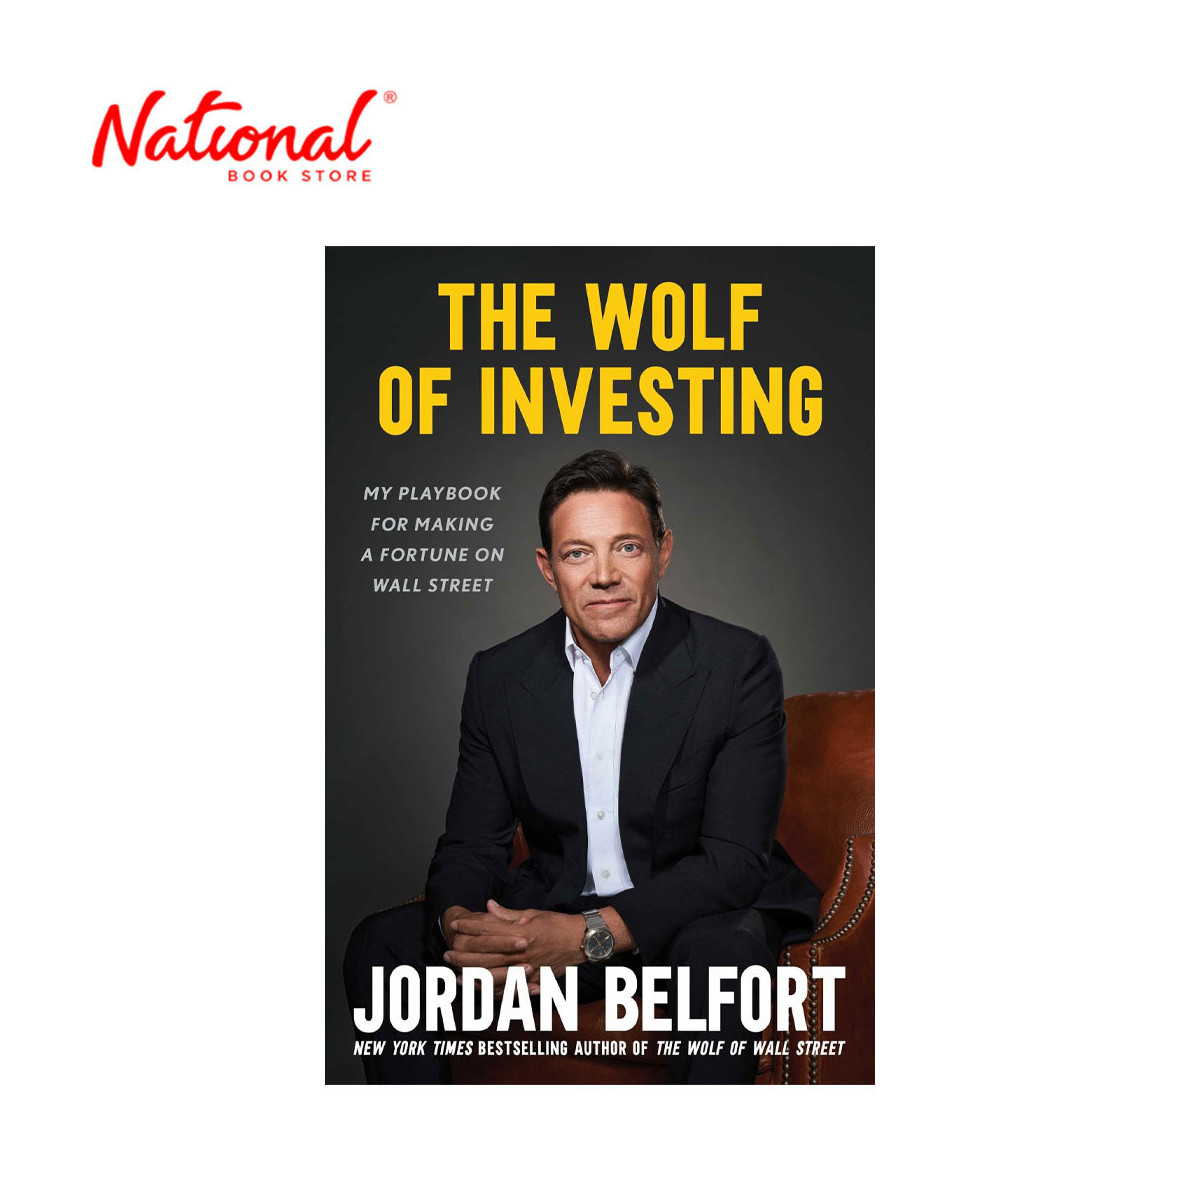 The Wolf Of Investing by Jordan Belfort Trade Paperback - Business & Investing